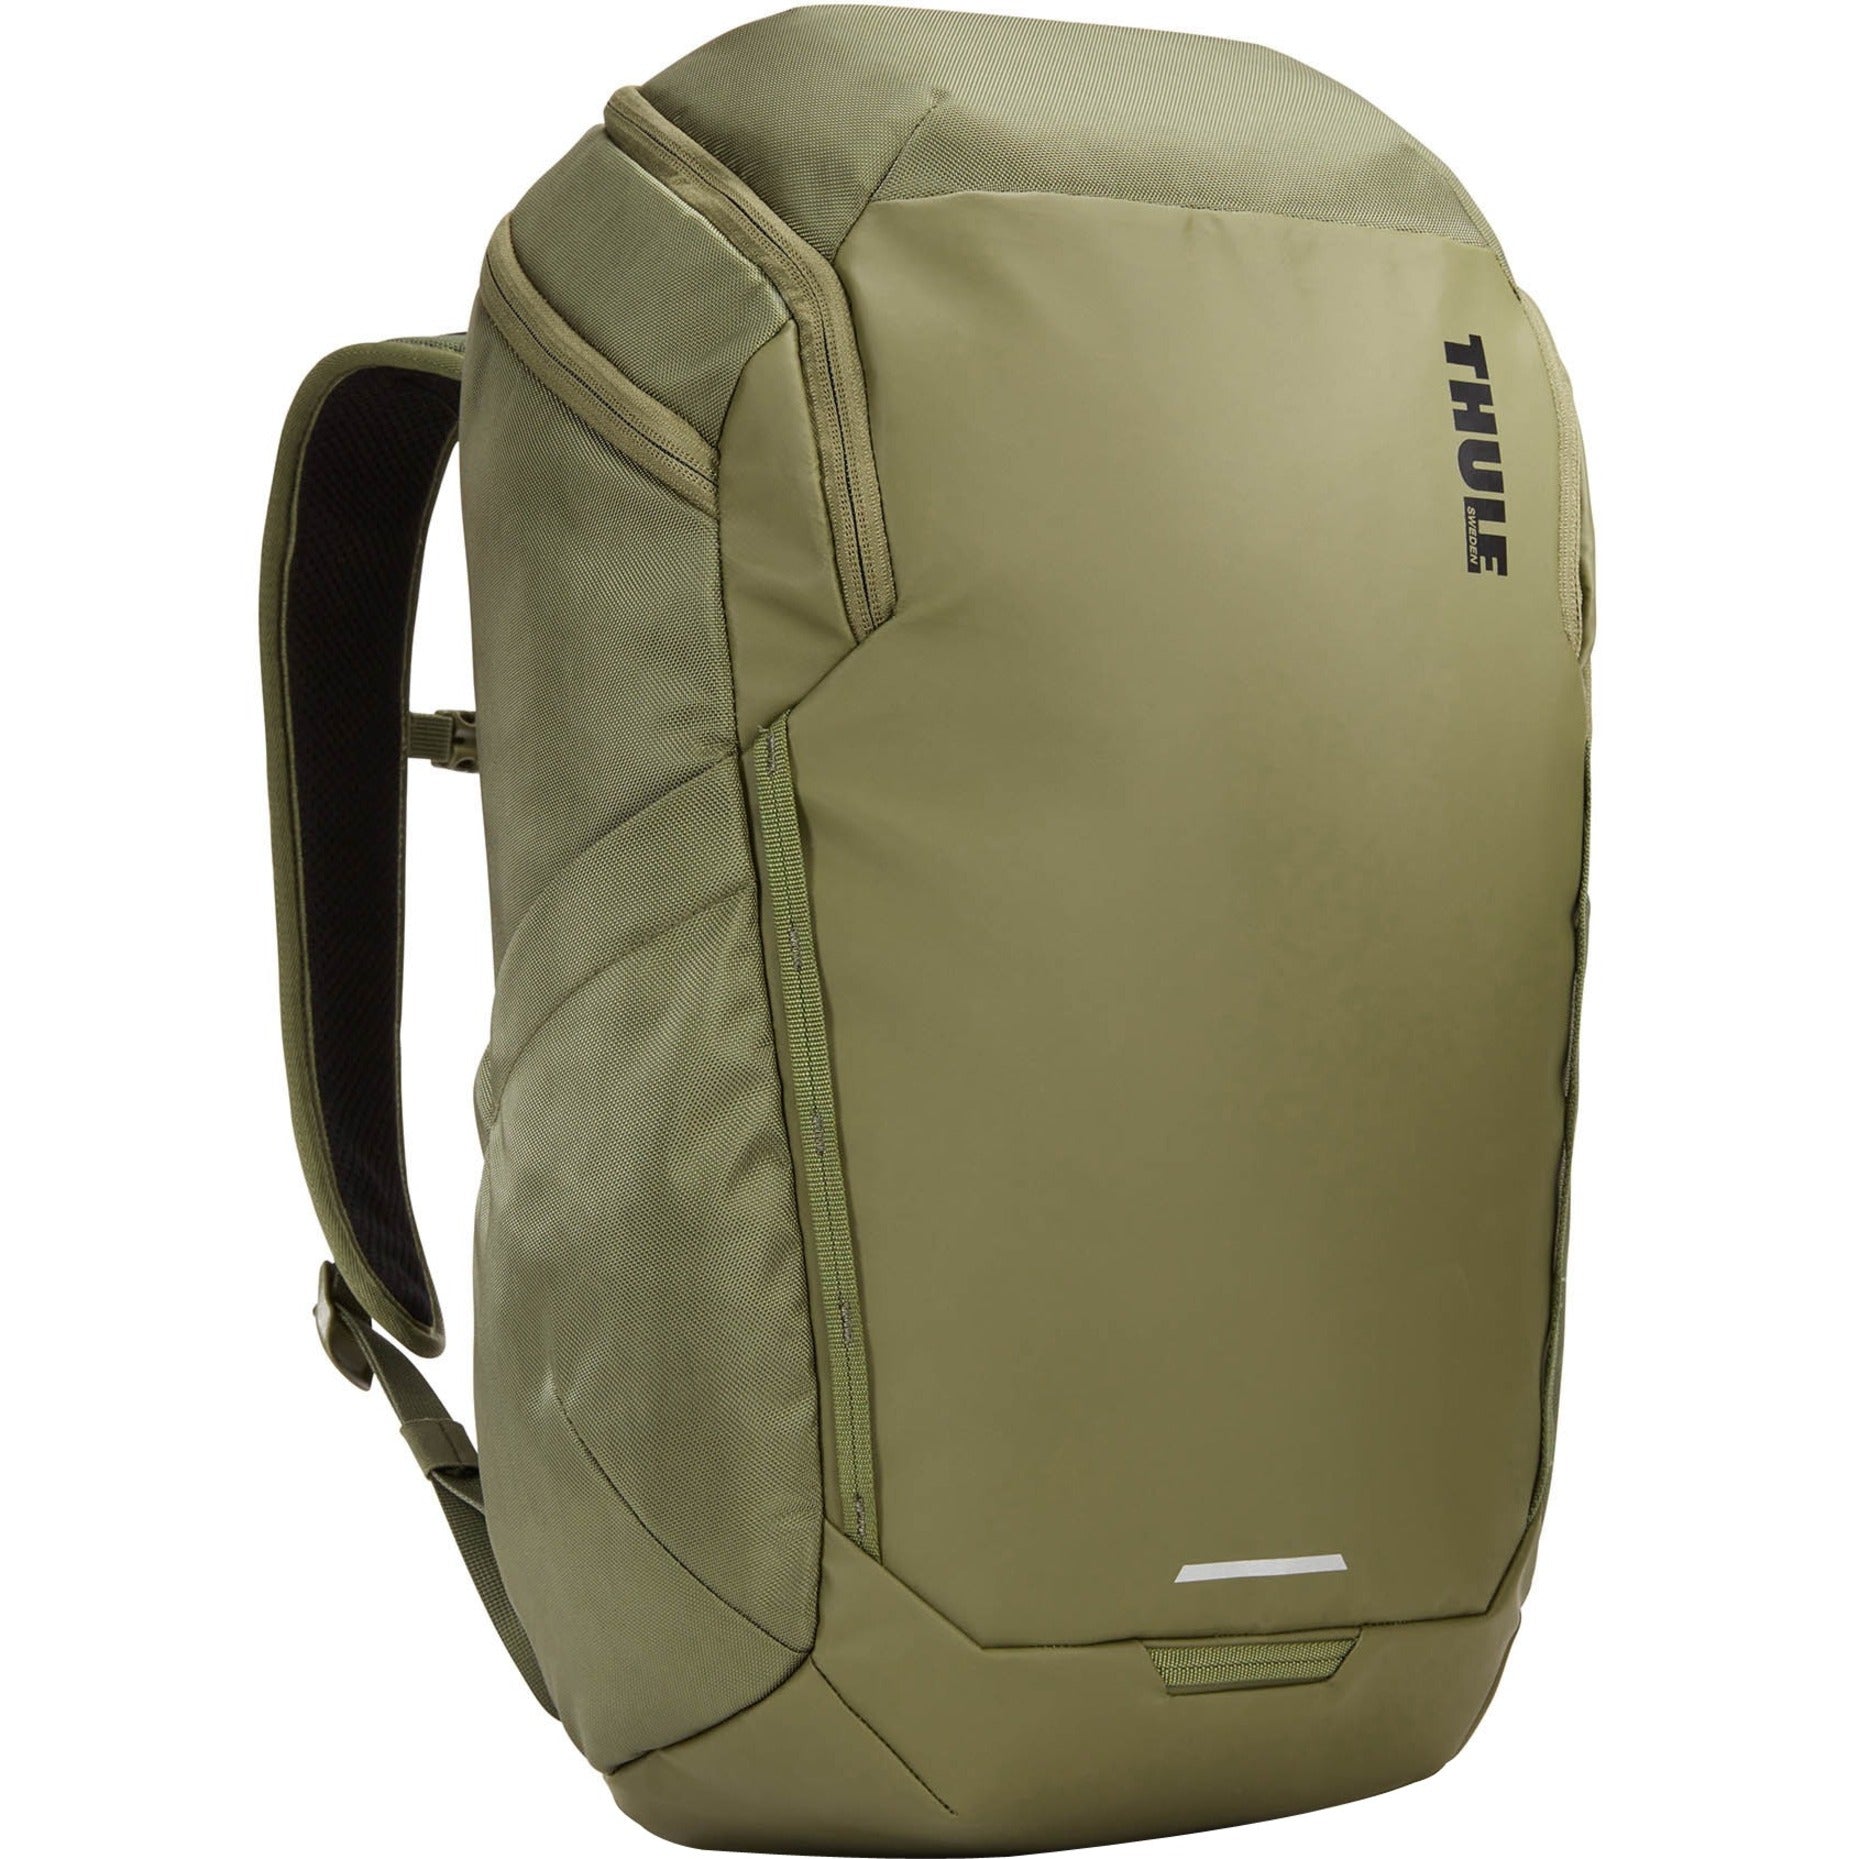 Thule 3204294 Chasm backpack 26L olivine, Sport, Notebook, Water Bottle, Accessories, MacBook carrying case